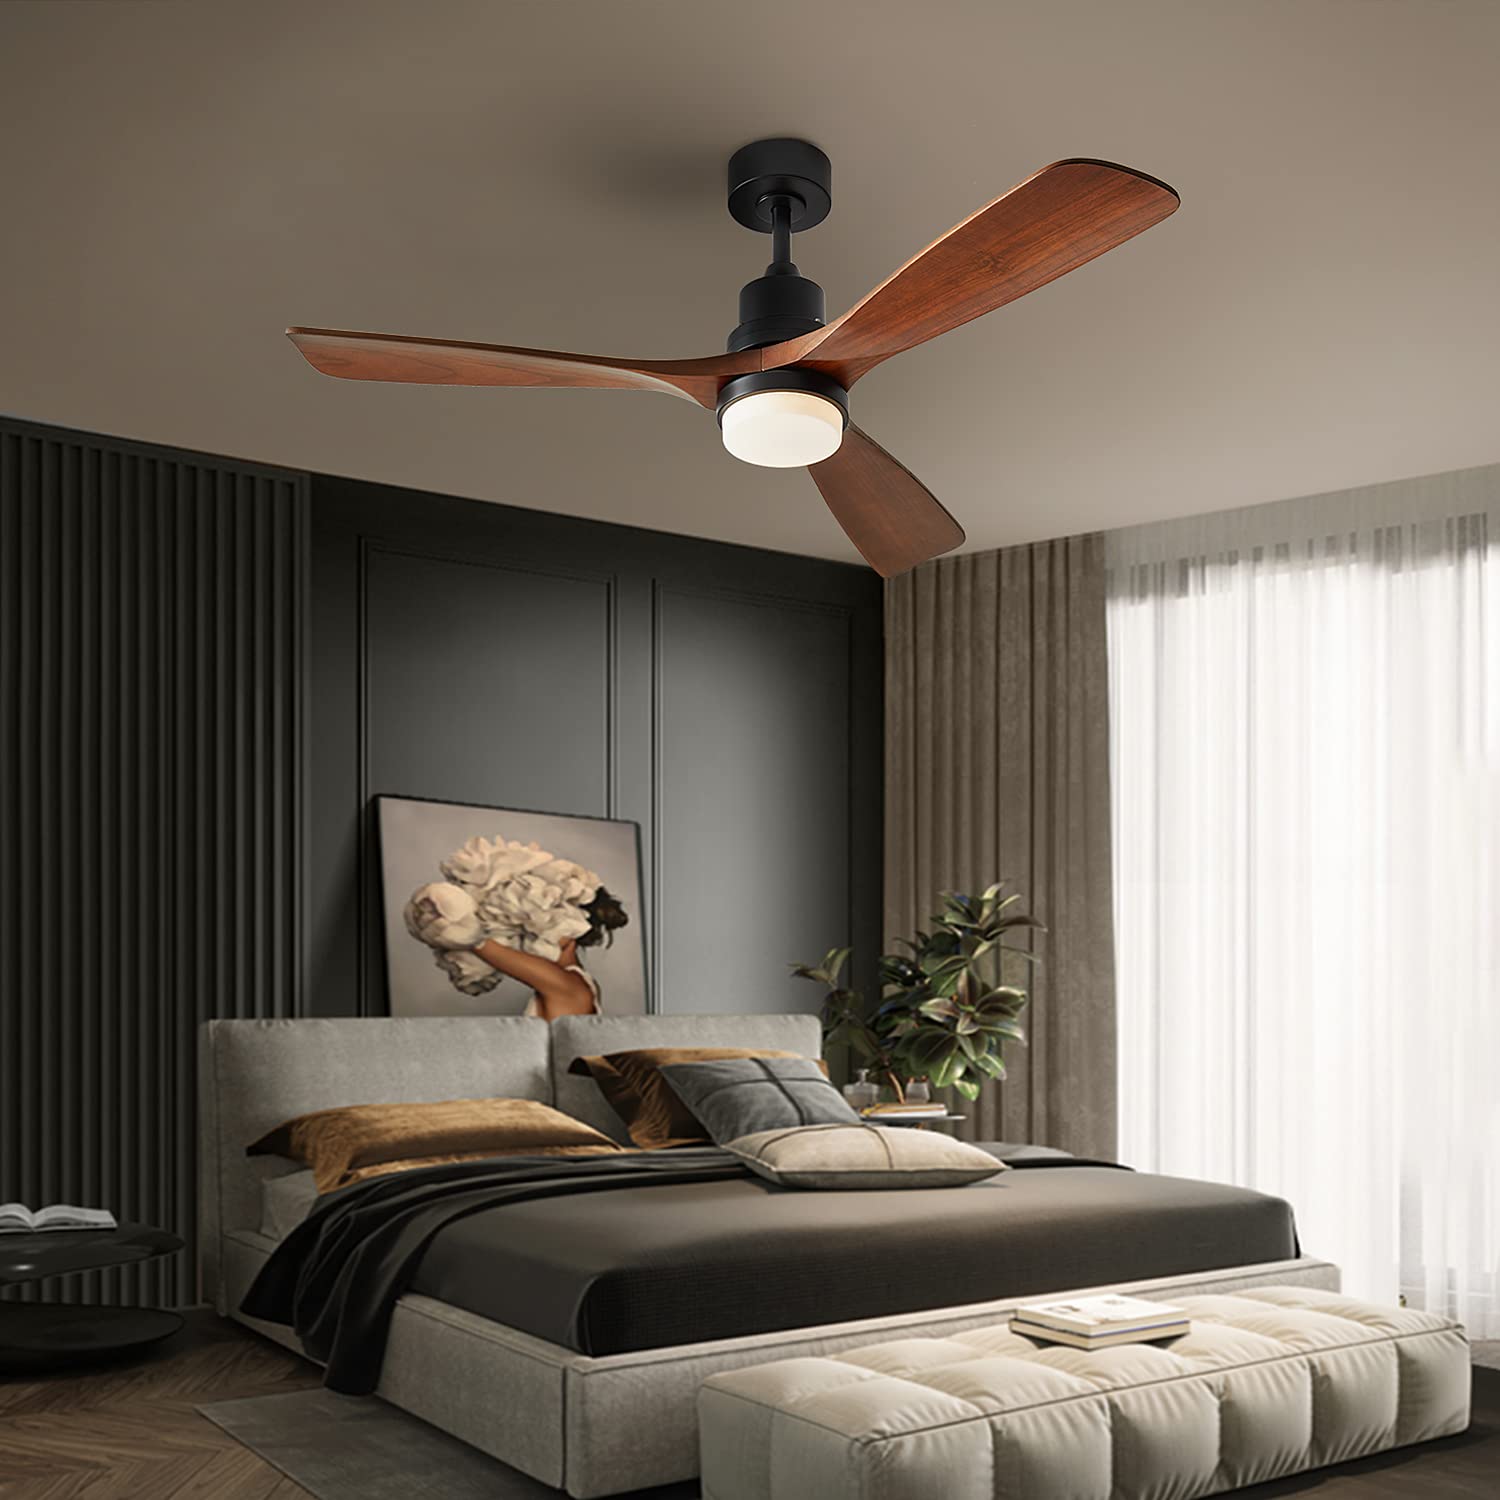 Chriari Ceiling Fans with Lights, 60" Wood Ceiling Fan with Remote Control